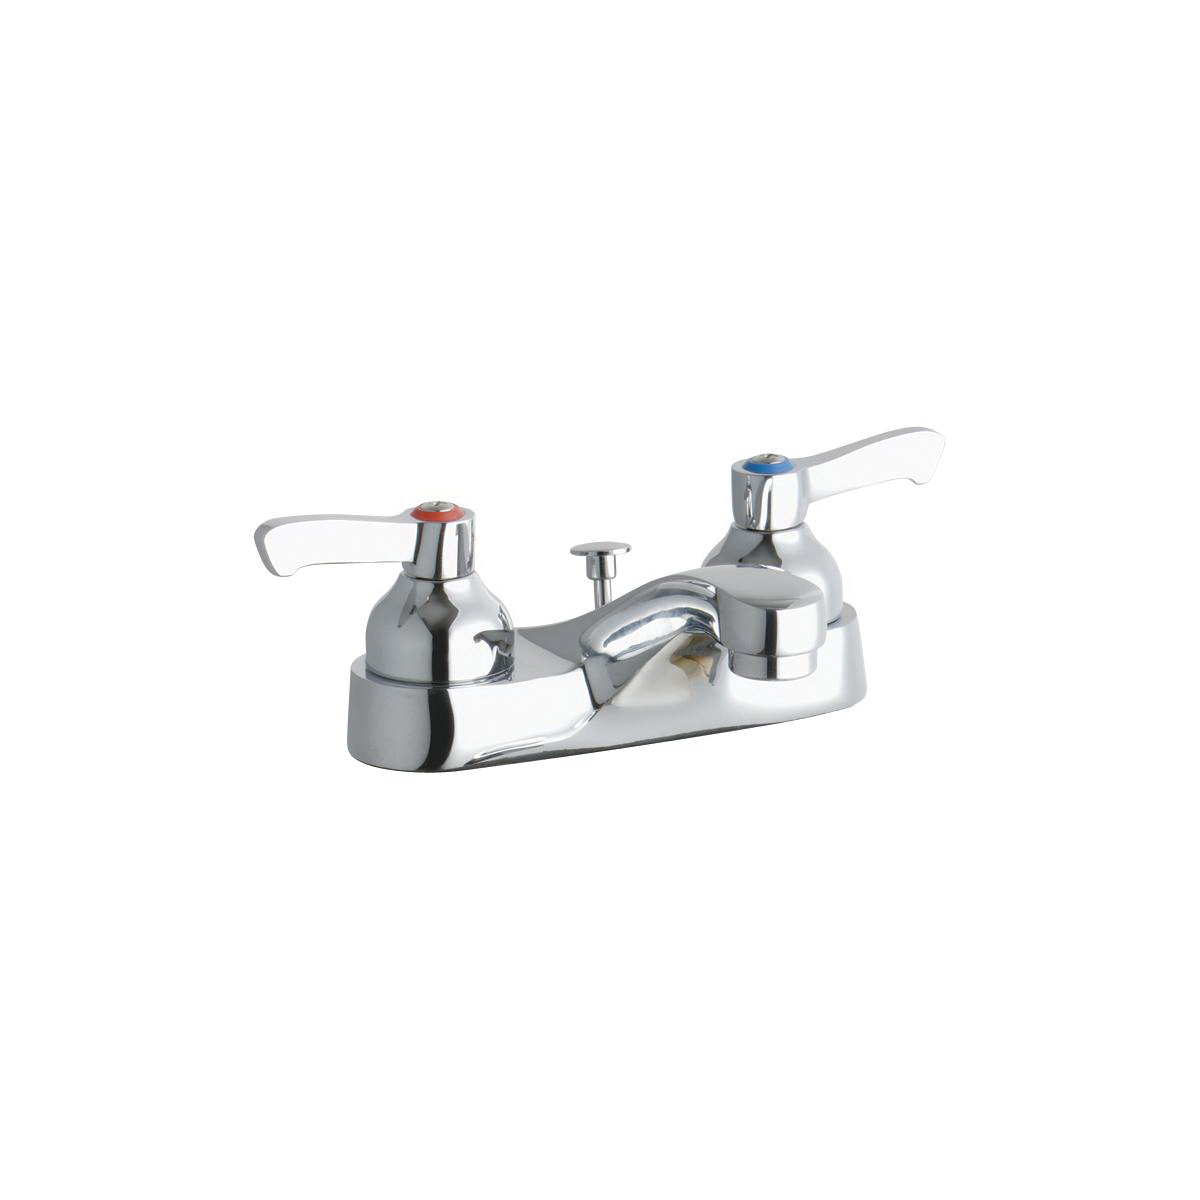 Elkay® LK403L2 Exposed Centerset Bathroom Faucet, Chrome Plated, 2 Handles, Pop-Up Drain, 0.5 gpm